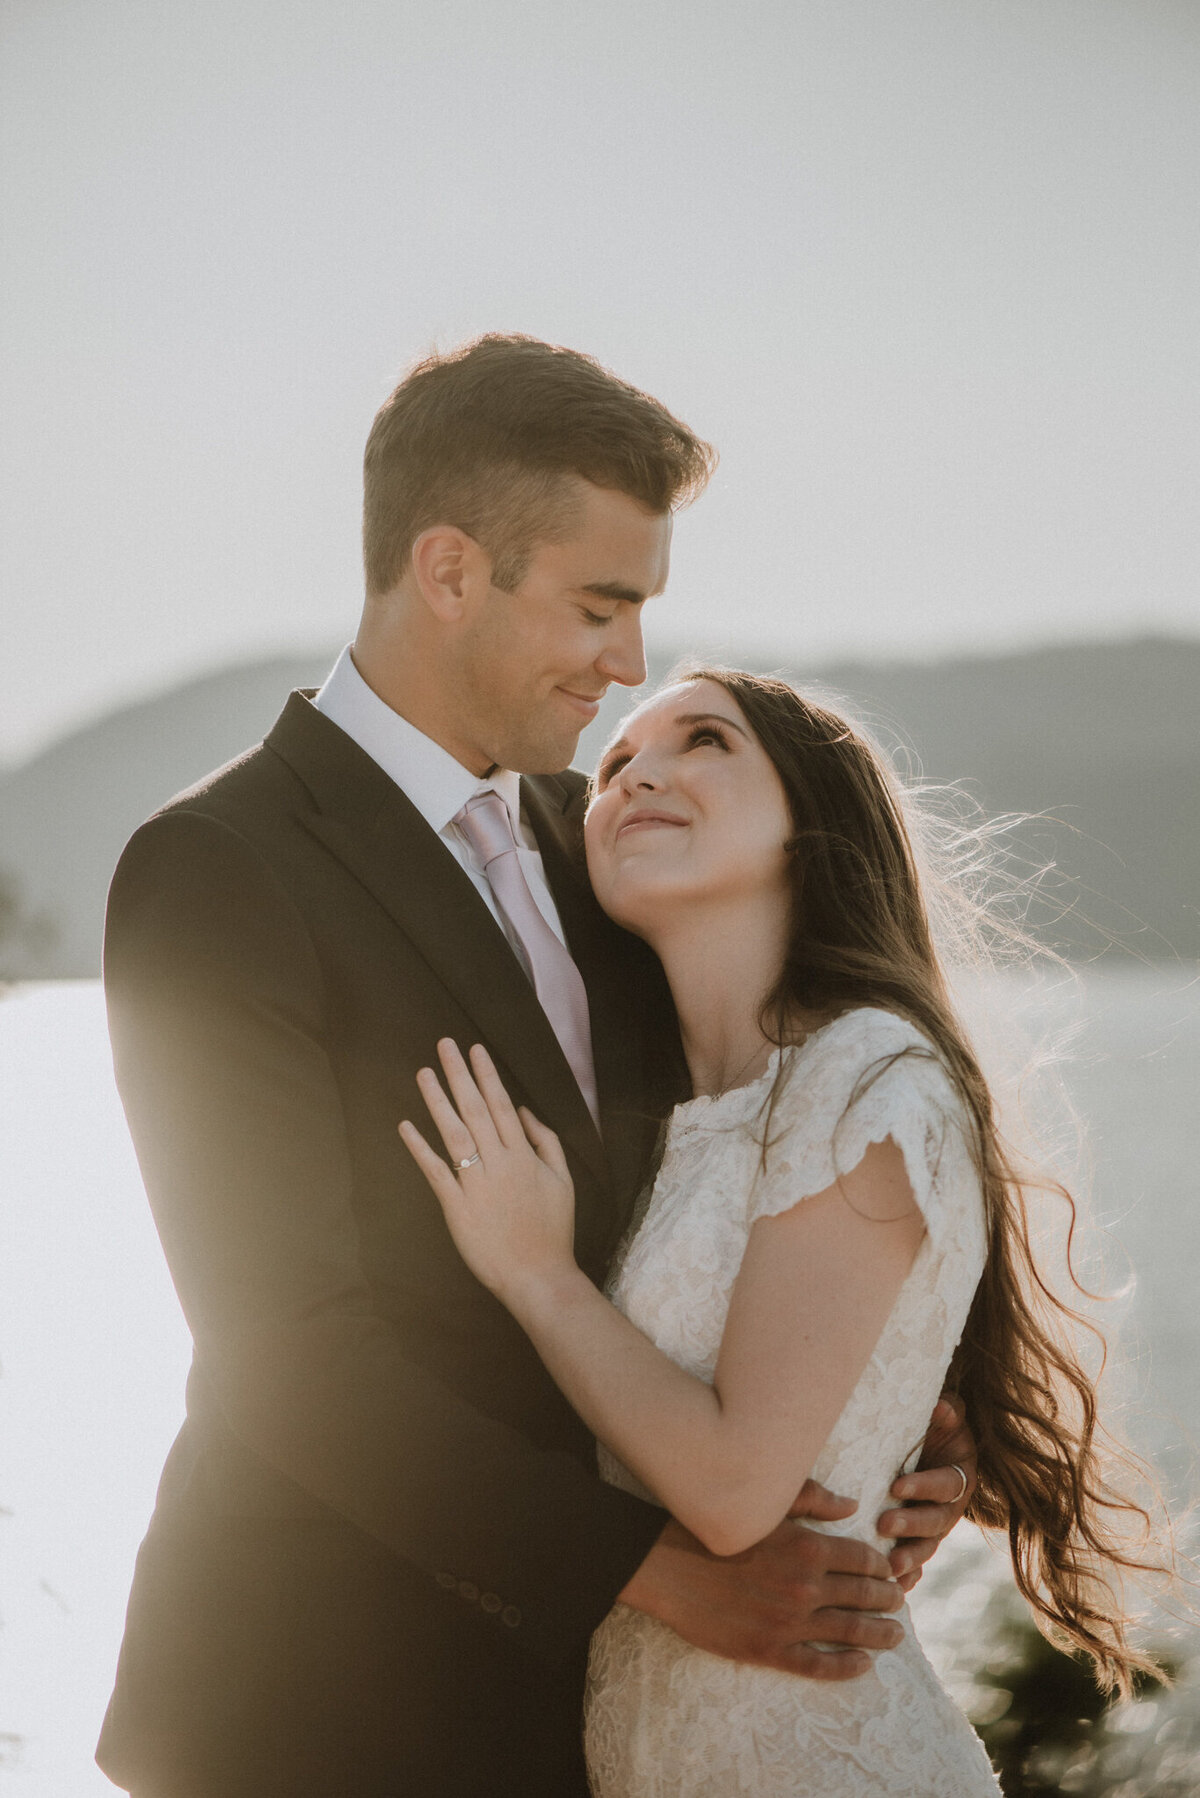 Stunning bride and groom portrait, captured by Photos by Marissa, nostalgic and romantic wedding photographer in Kelowna, BC. Featured on the Bronte Bride Vendor Guide.